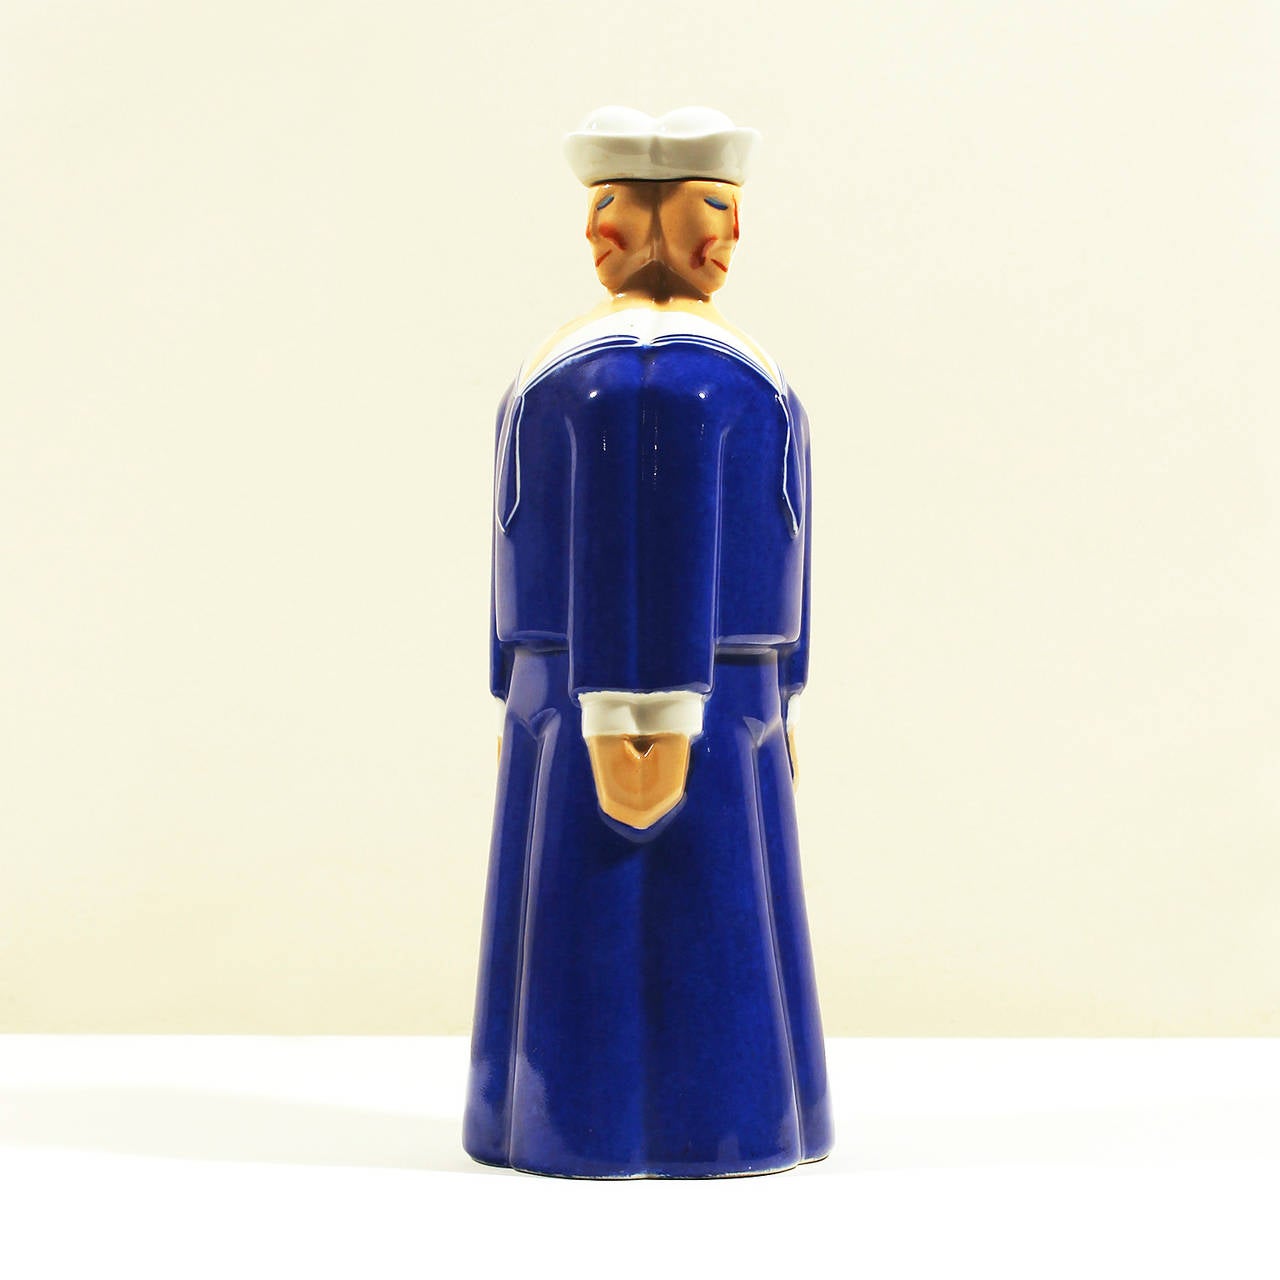 Art Deco porcelain decanter, modelled as 3 stylized sailors with the 3 hats lid in blue, white, beige and orange colours.
Printed mark underside: ROBJ - Paris - Made in France.
Manufacturer: Robj 
France c. 1920